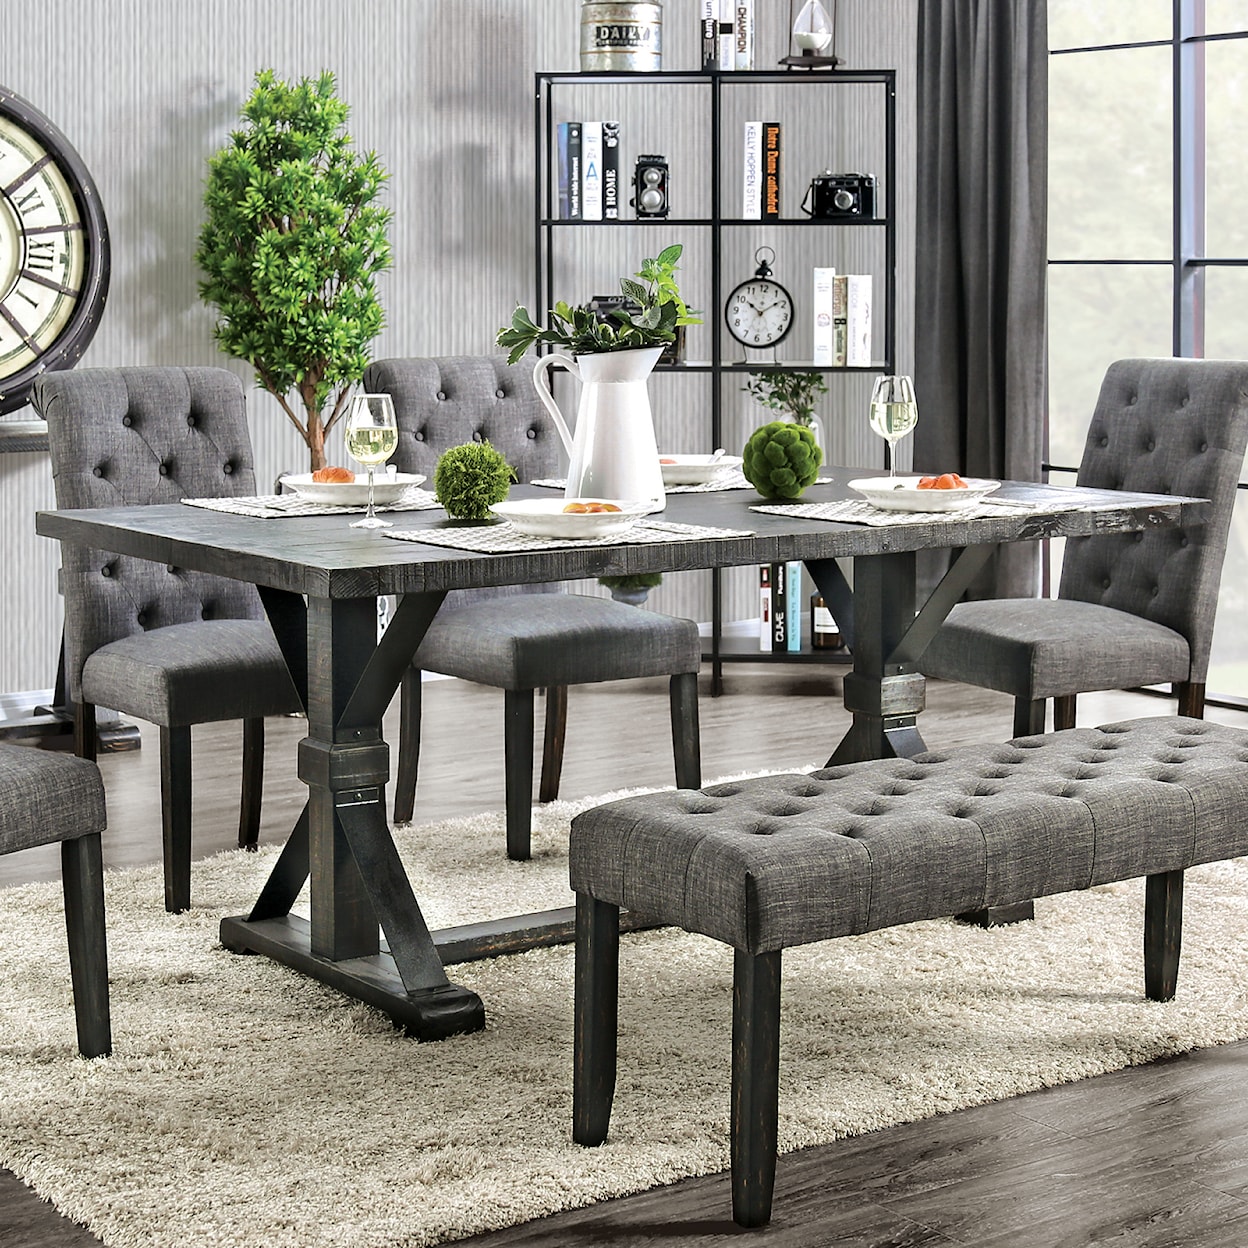 Furniture of America Alfred Dining Table